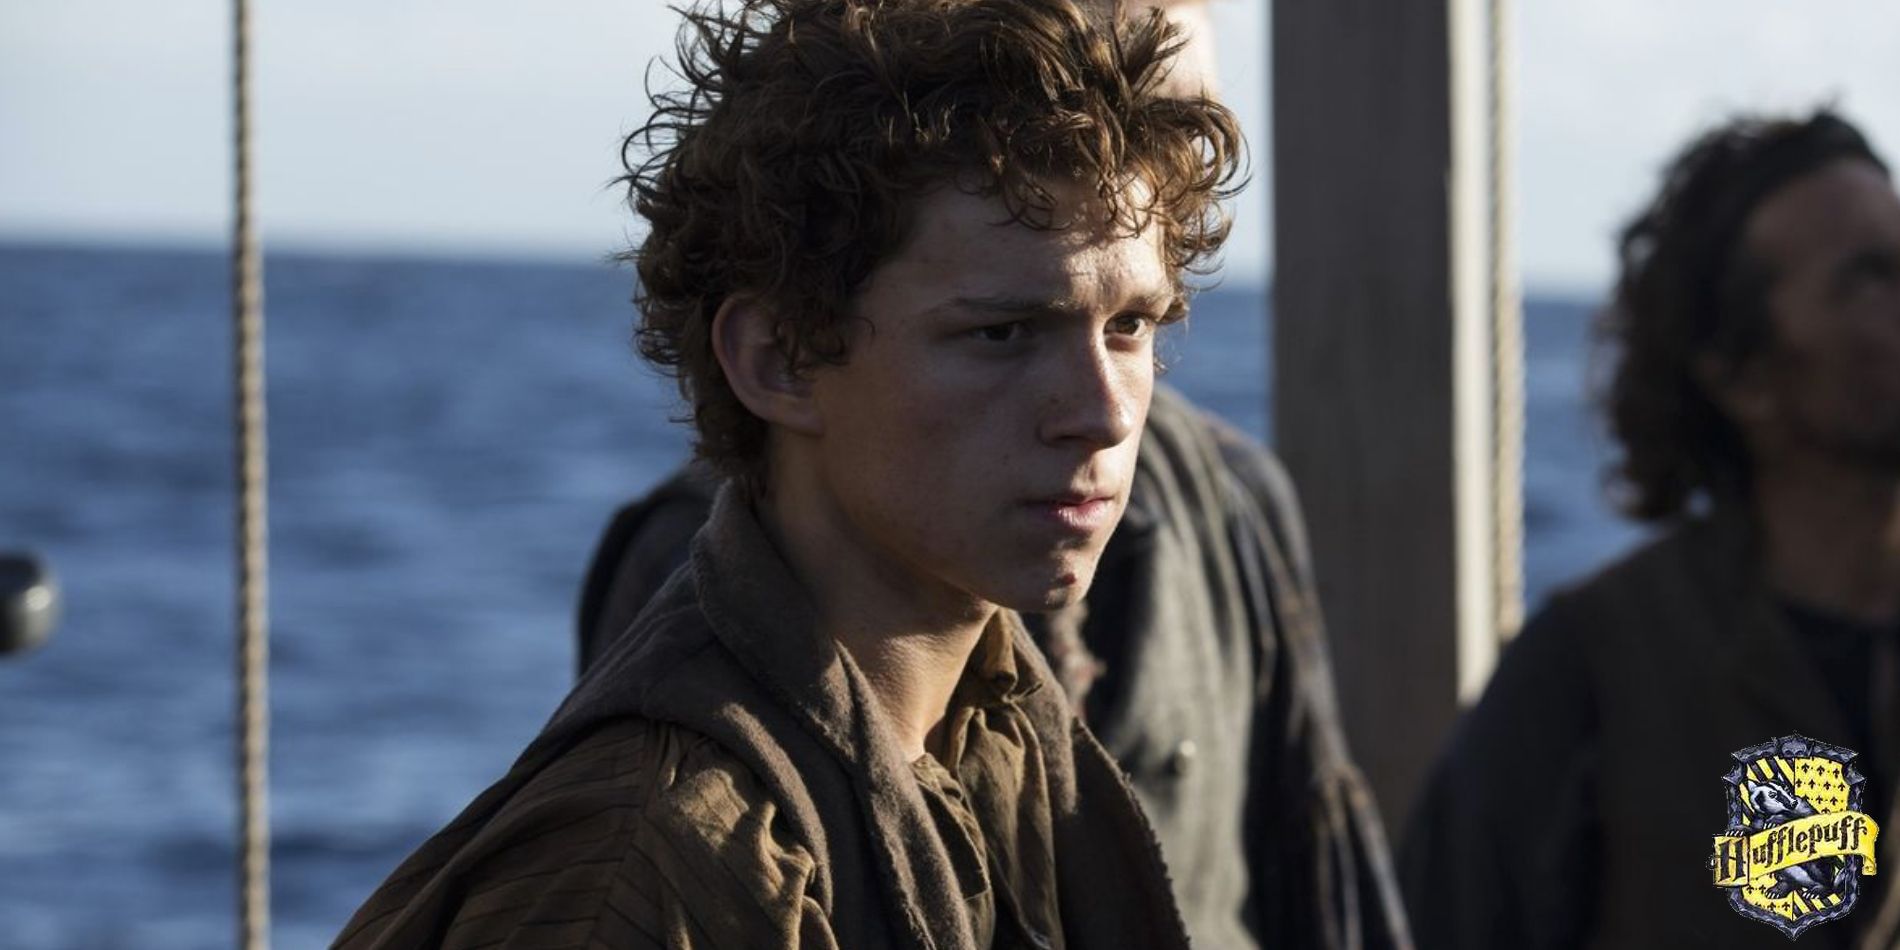 Tom Holland As Thomas Nickerson In The Heart Of The Sea on a ship.